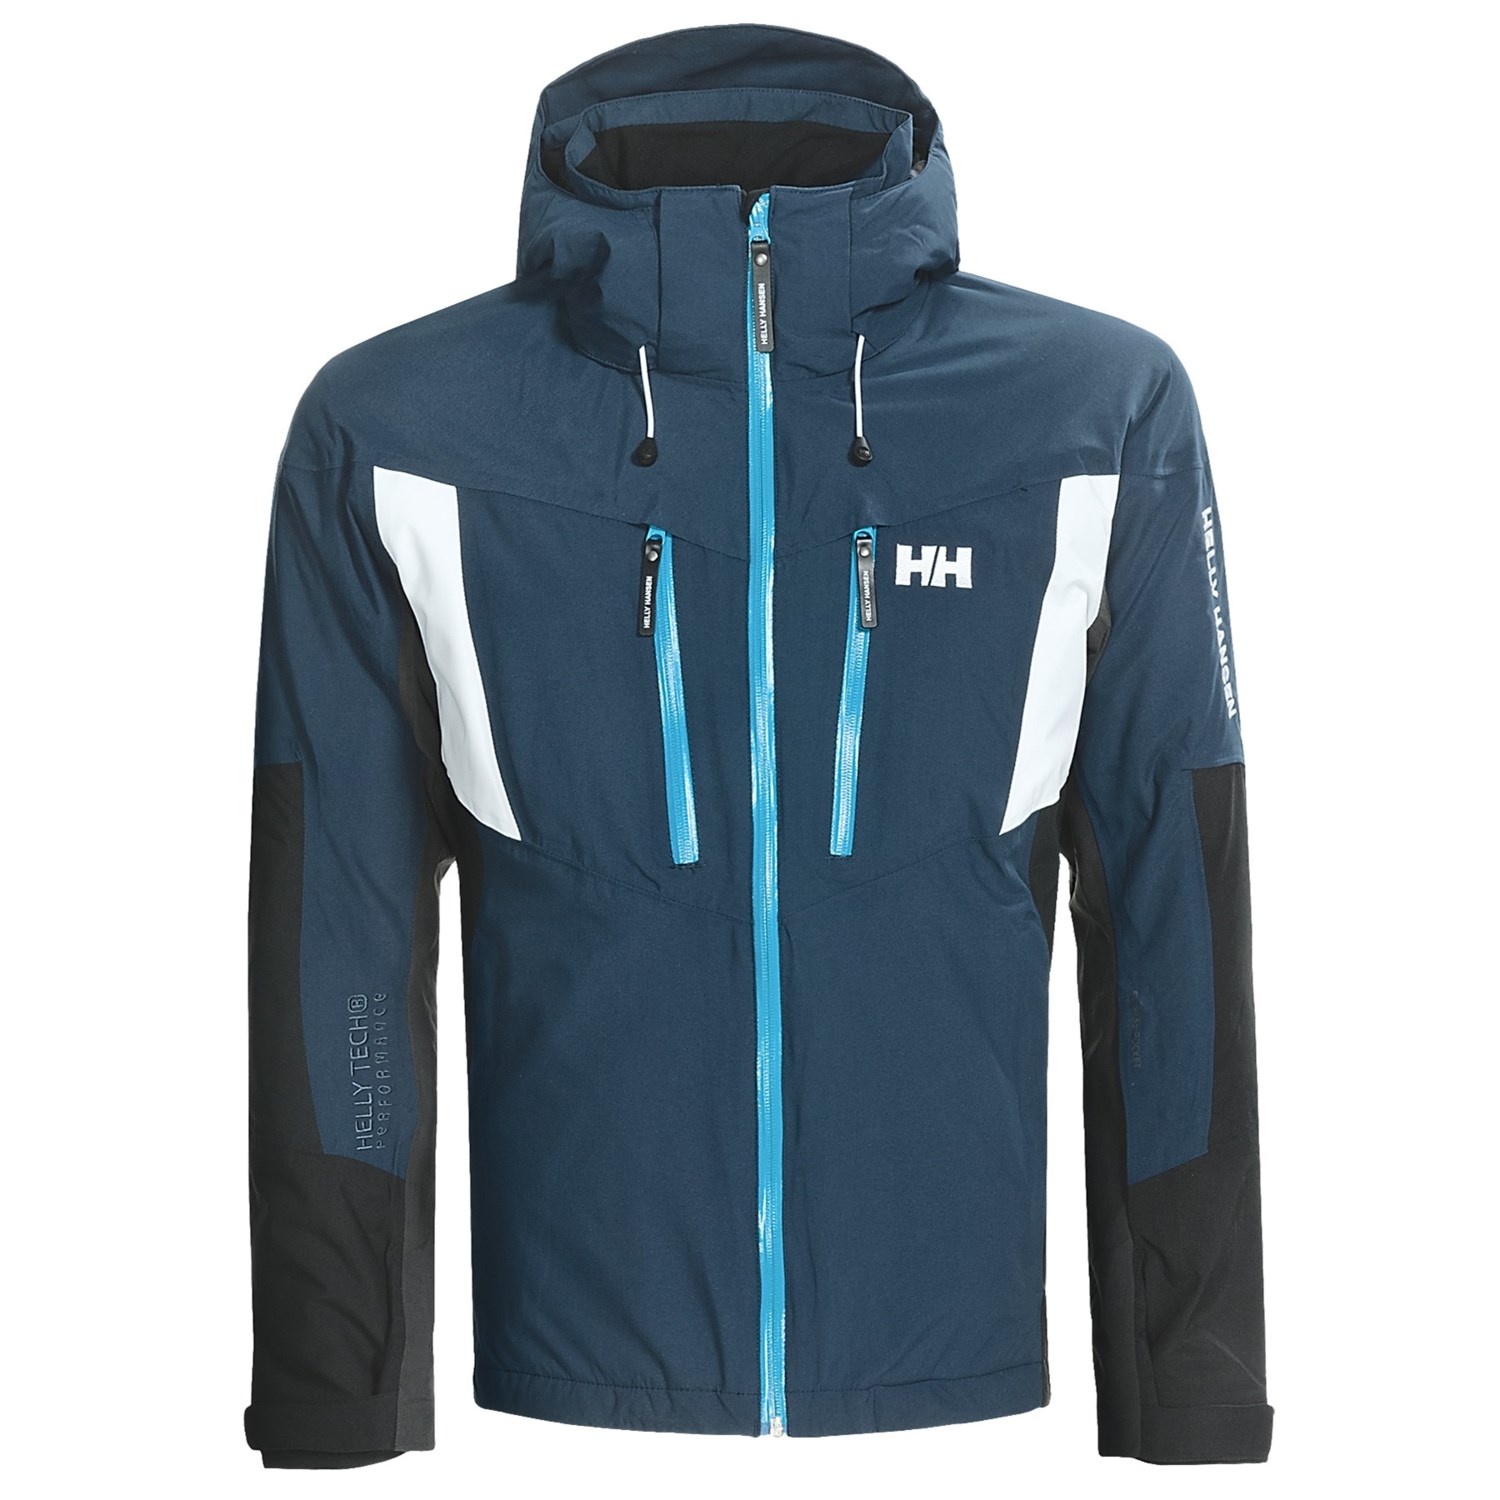 Helly Hansen Velocity Jacket - Waterproof, Insulated (For Men) - Save 33%